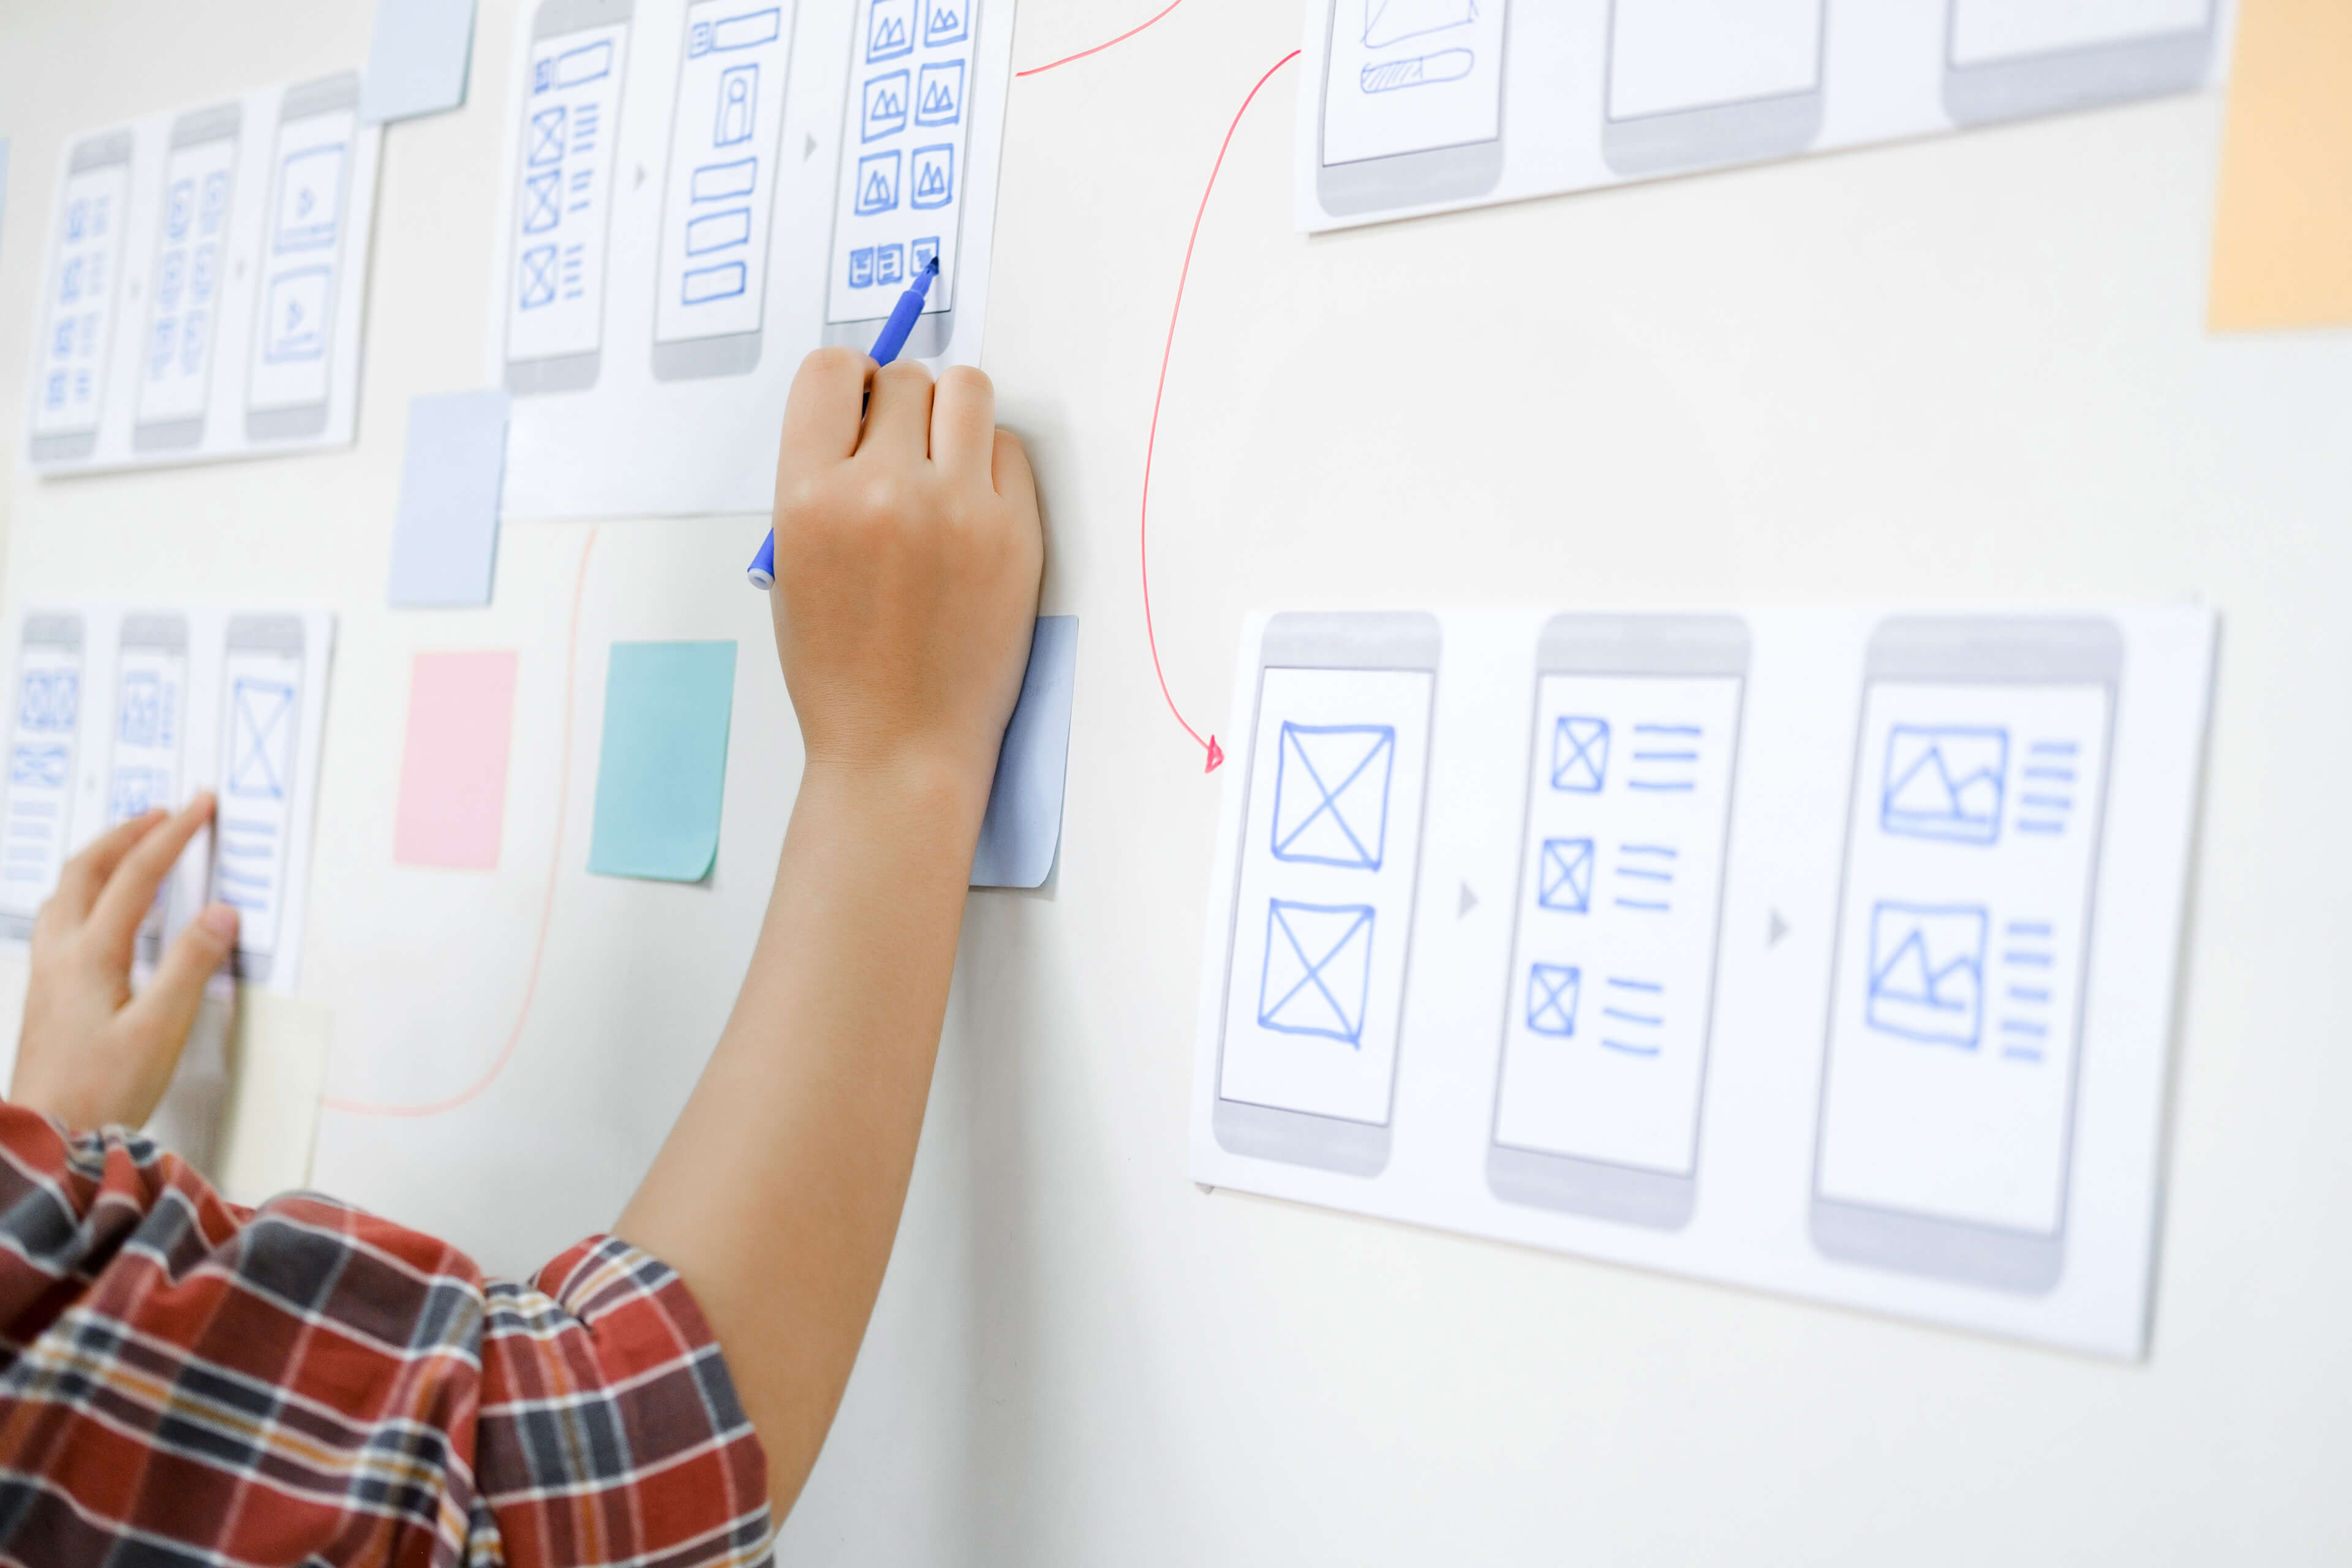 Photograph of mobile user interface designs on a wall being edited and examined for user experience